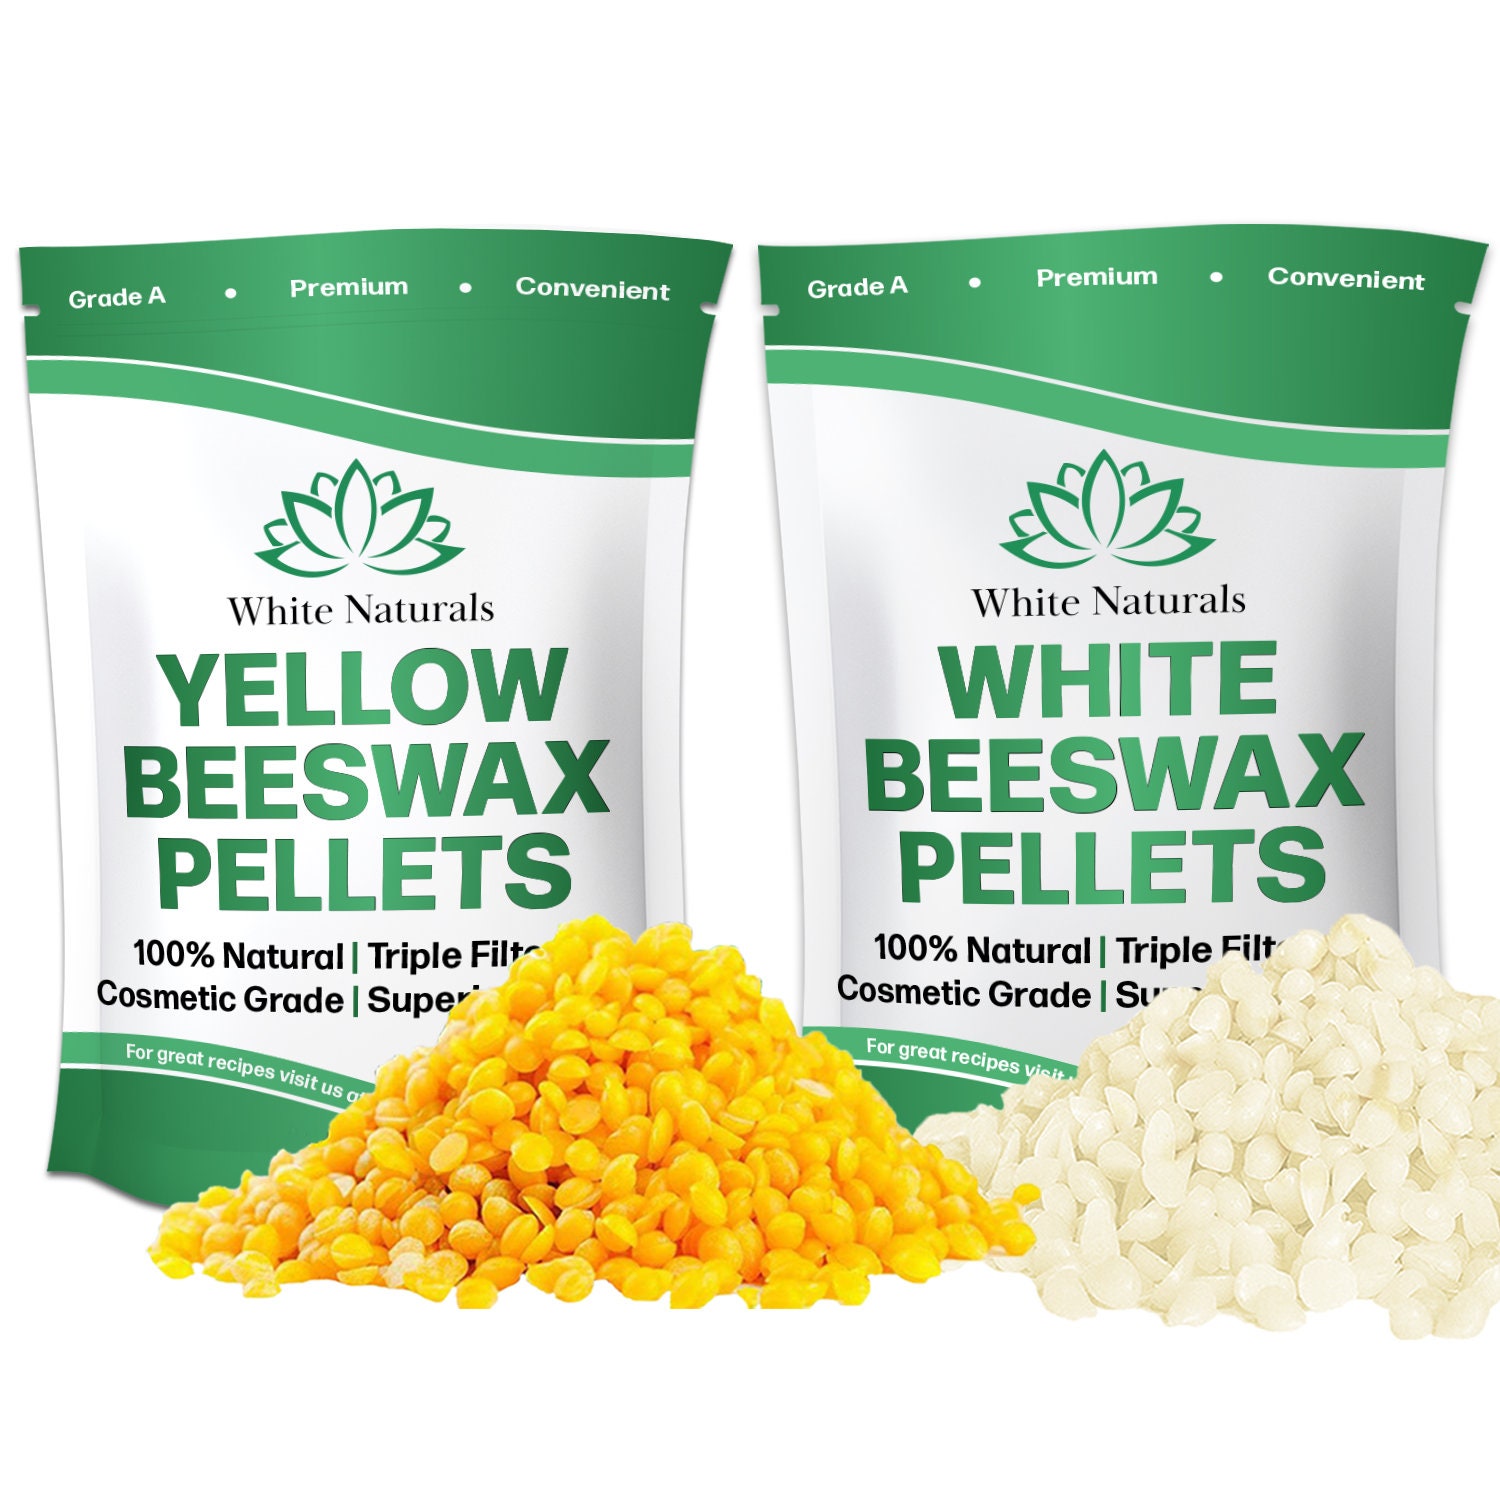 Organic Beeswax Pellets, Natural, Yellow, Filtered 1 POUND, Free